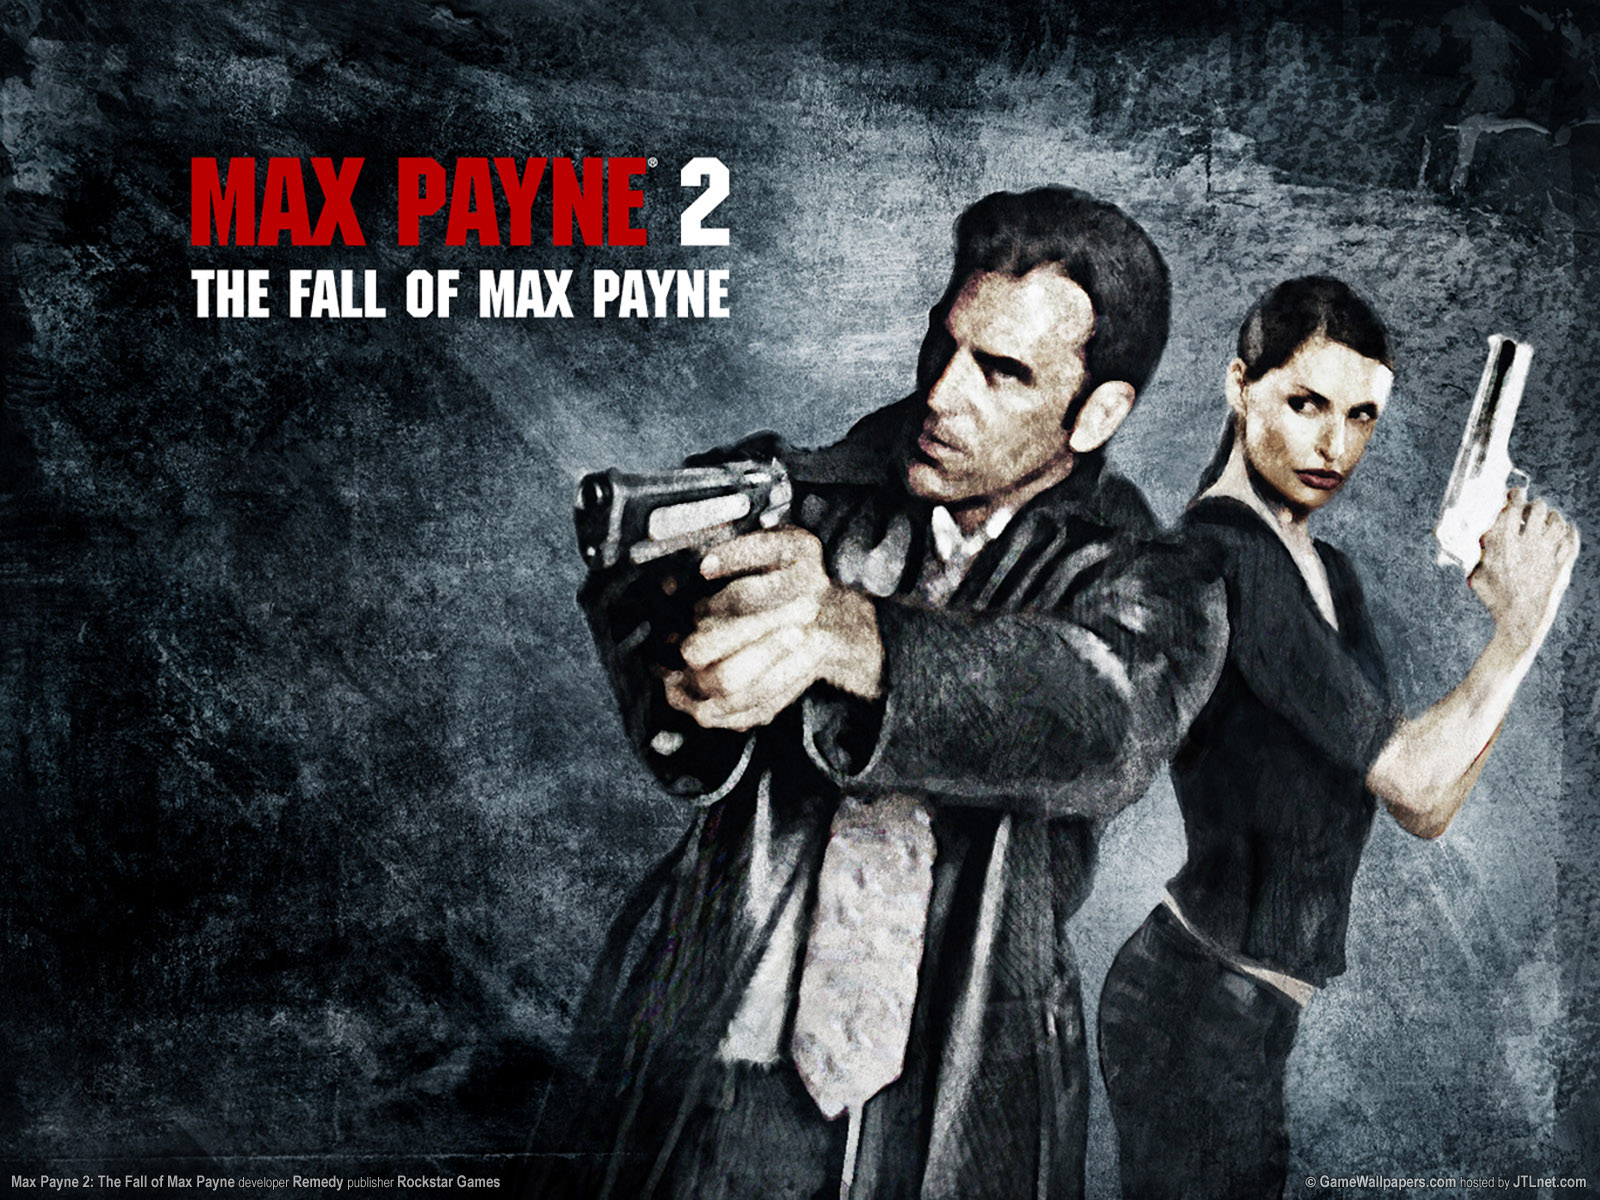 What Made Max Payne 2 One Hell of A Game? 